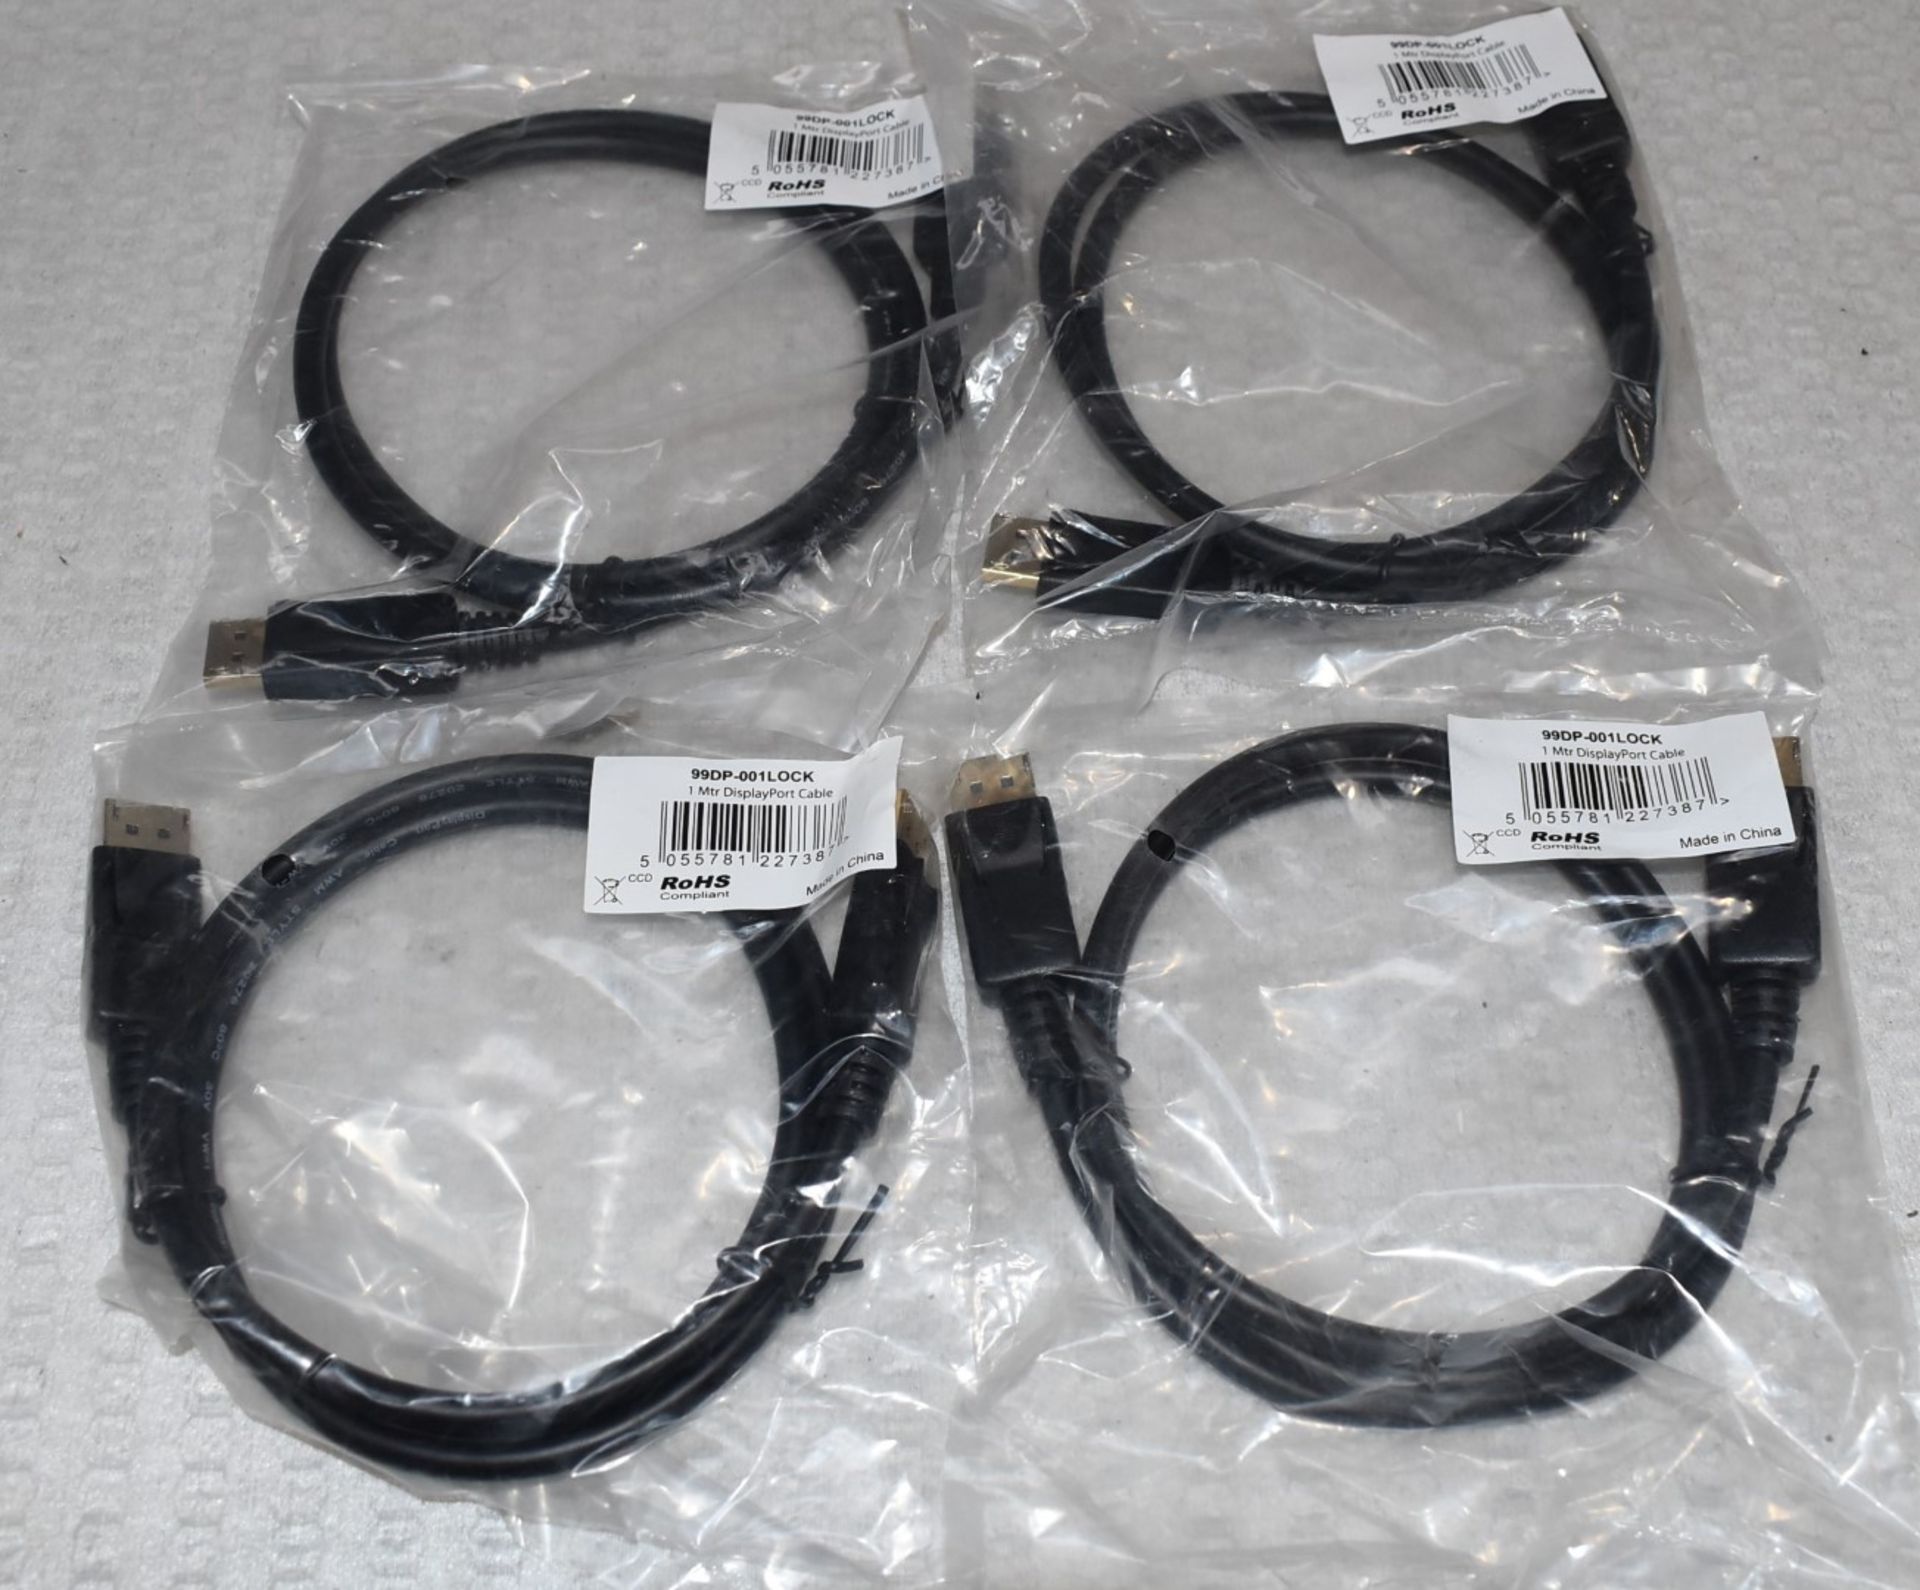 4 x DisplayPort 1 Meter Monitor Cables - New in Packets - Image 5 of 7